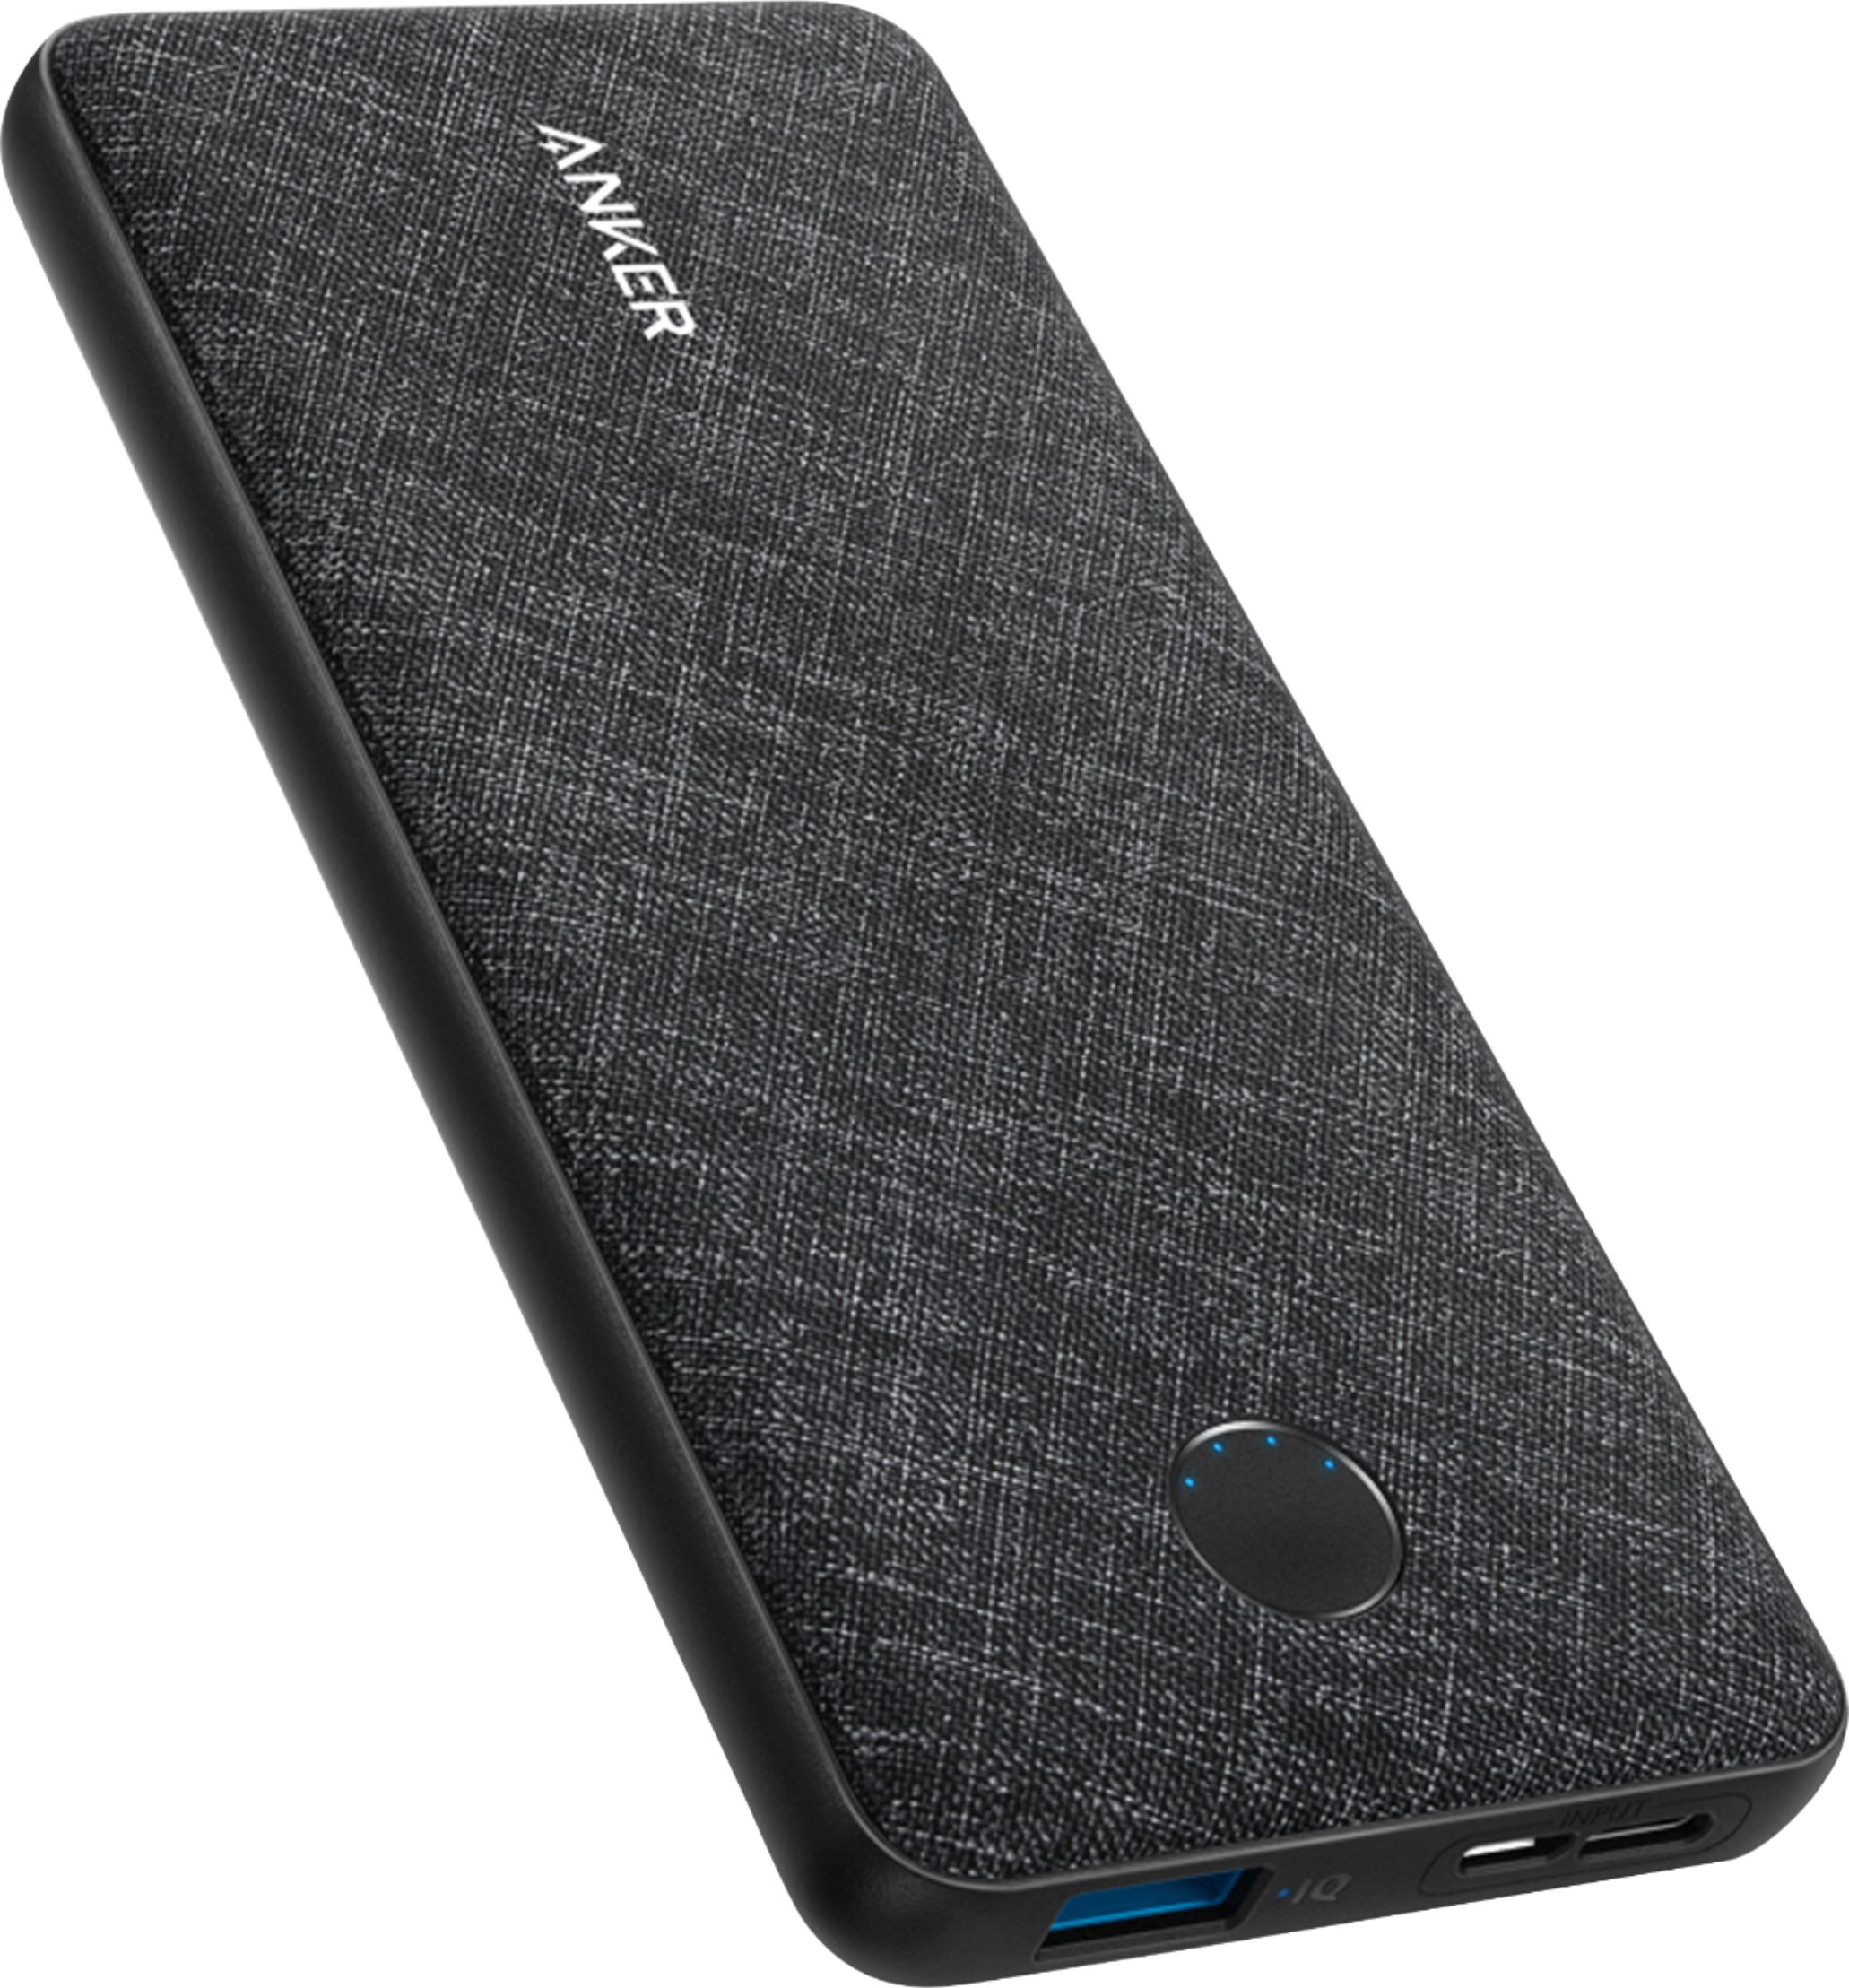 Angle View: Anker - PowerCore Portable Charger for Most USB Type-C Enabled Devices - Dark Gray